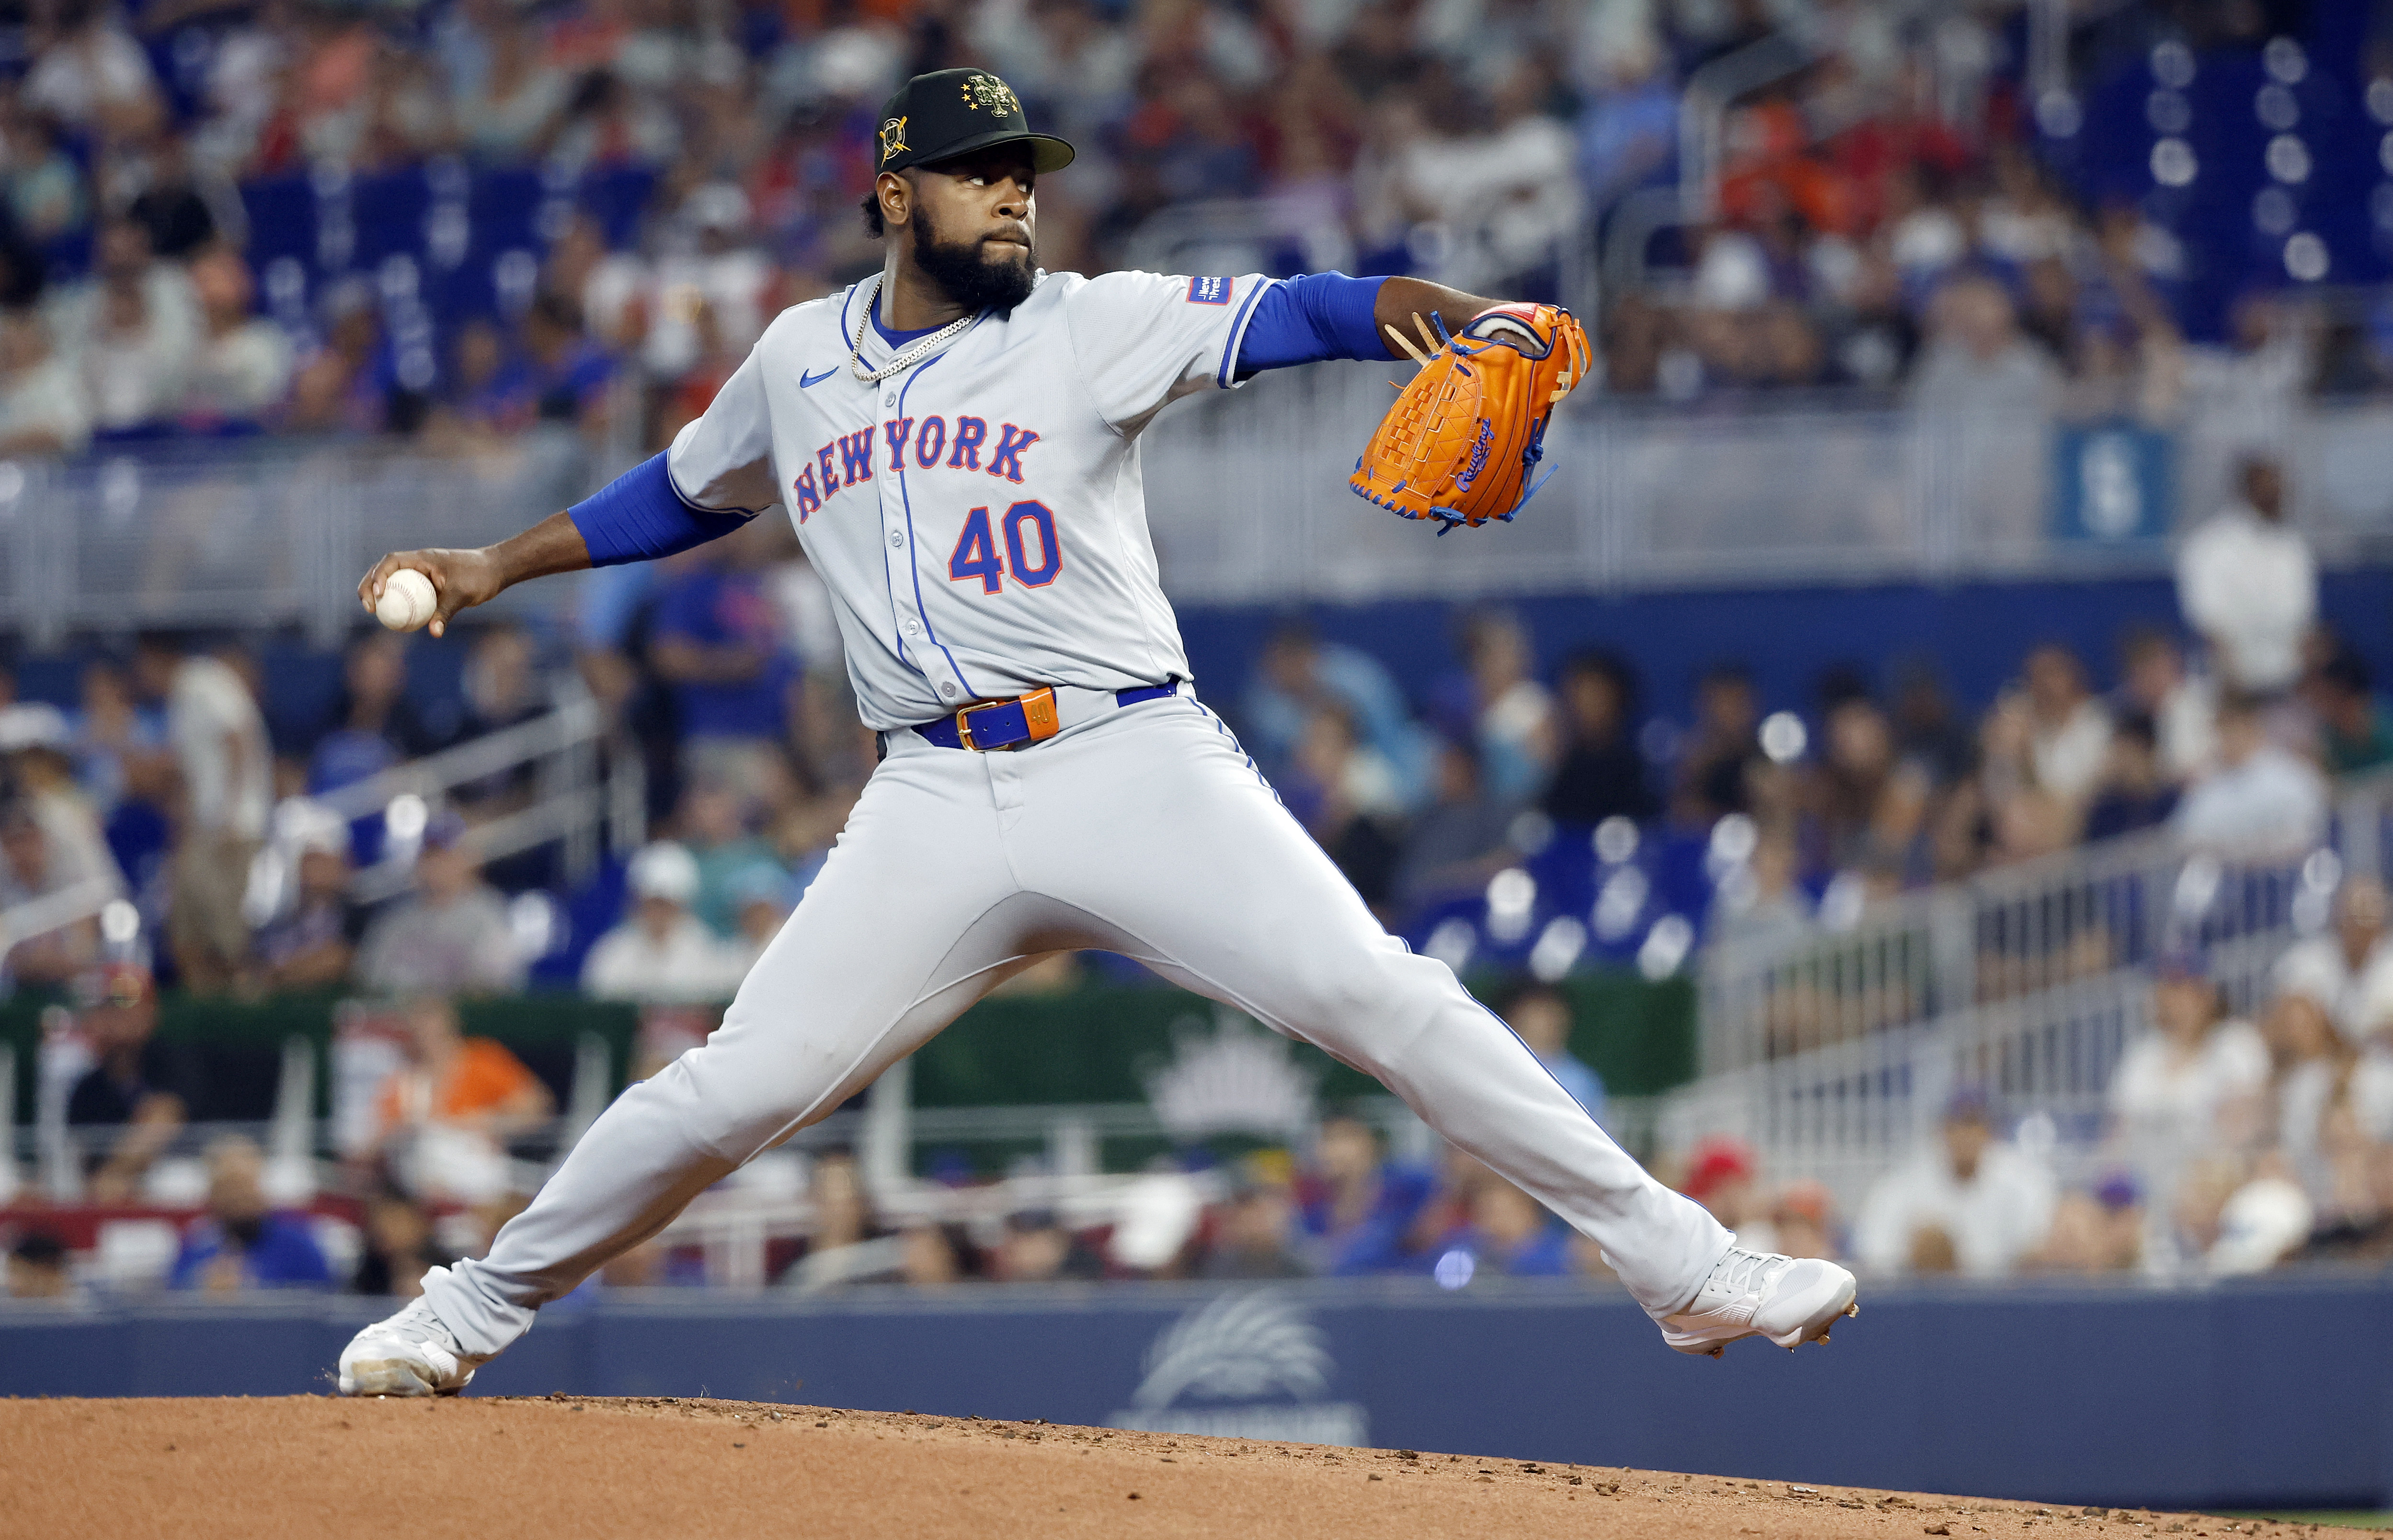 Should the Mets start shopping their suprise ace? 